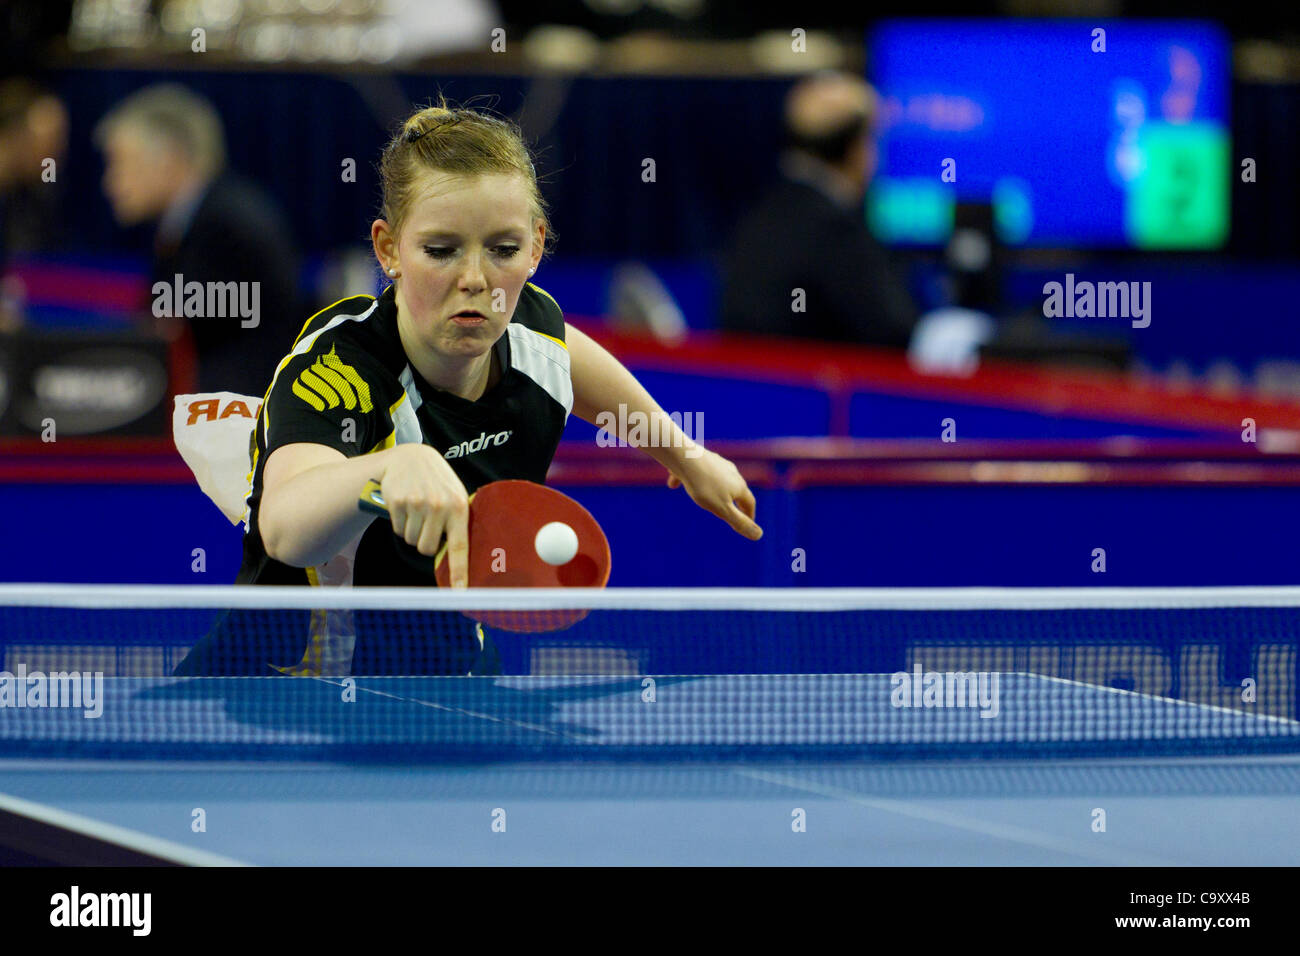 EINDHOVEN, THE NETHERLANDS, 03/03/2012. Table tennis player Britt Eerland (pictured) wins her match against Tali Cohen at the Dutch table tennis championships 2012 in Eindhoven. Stock Photo